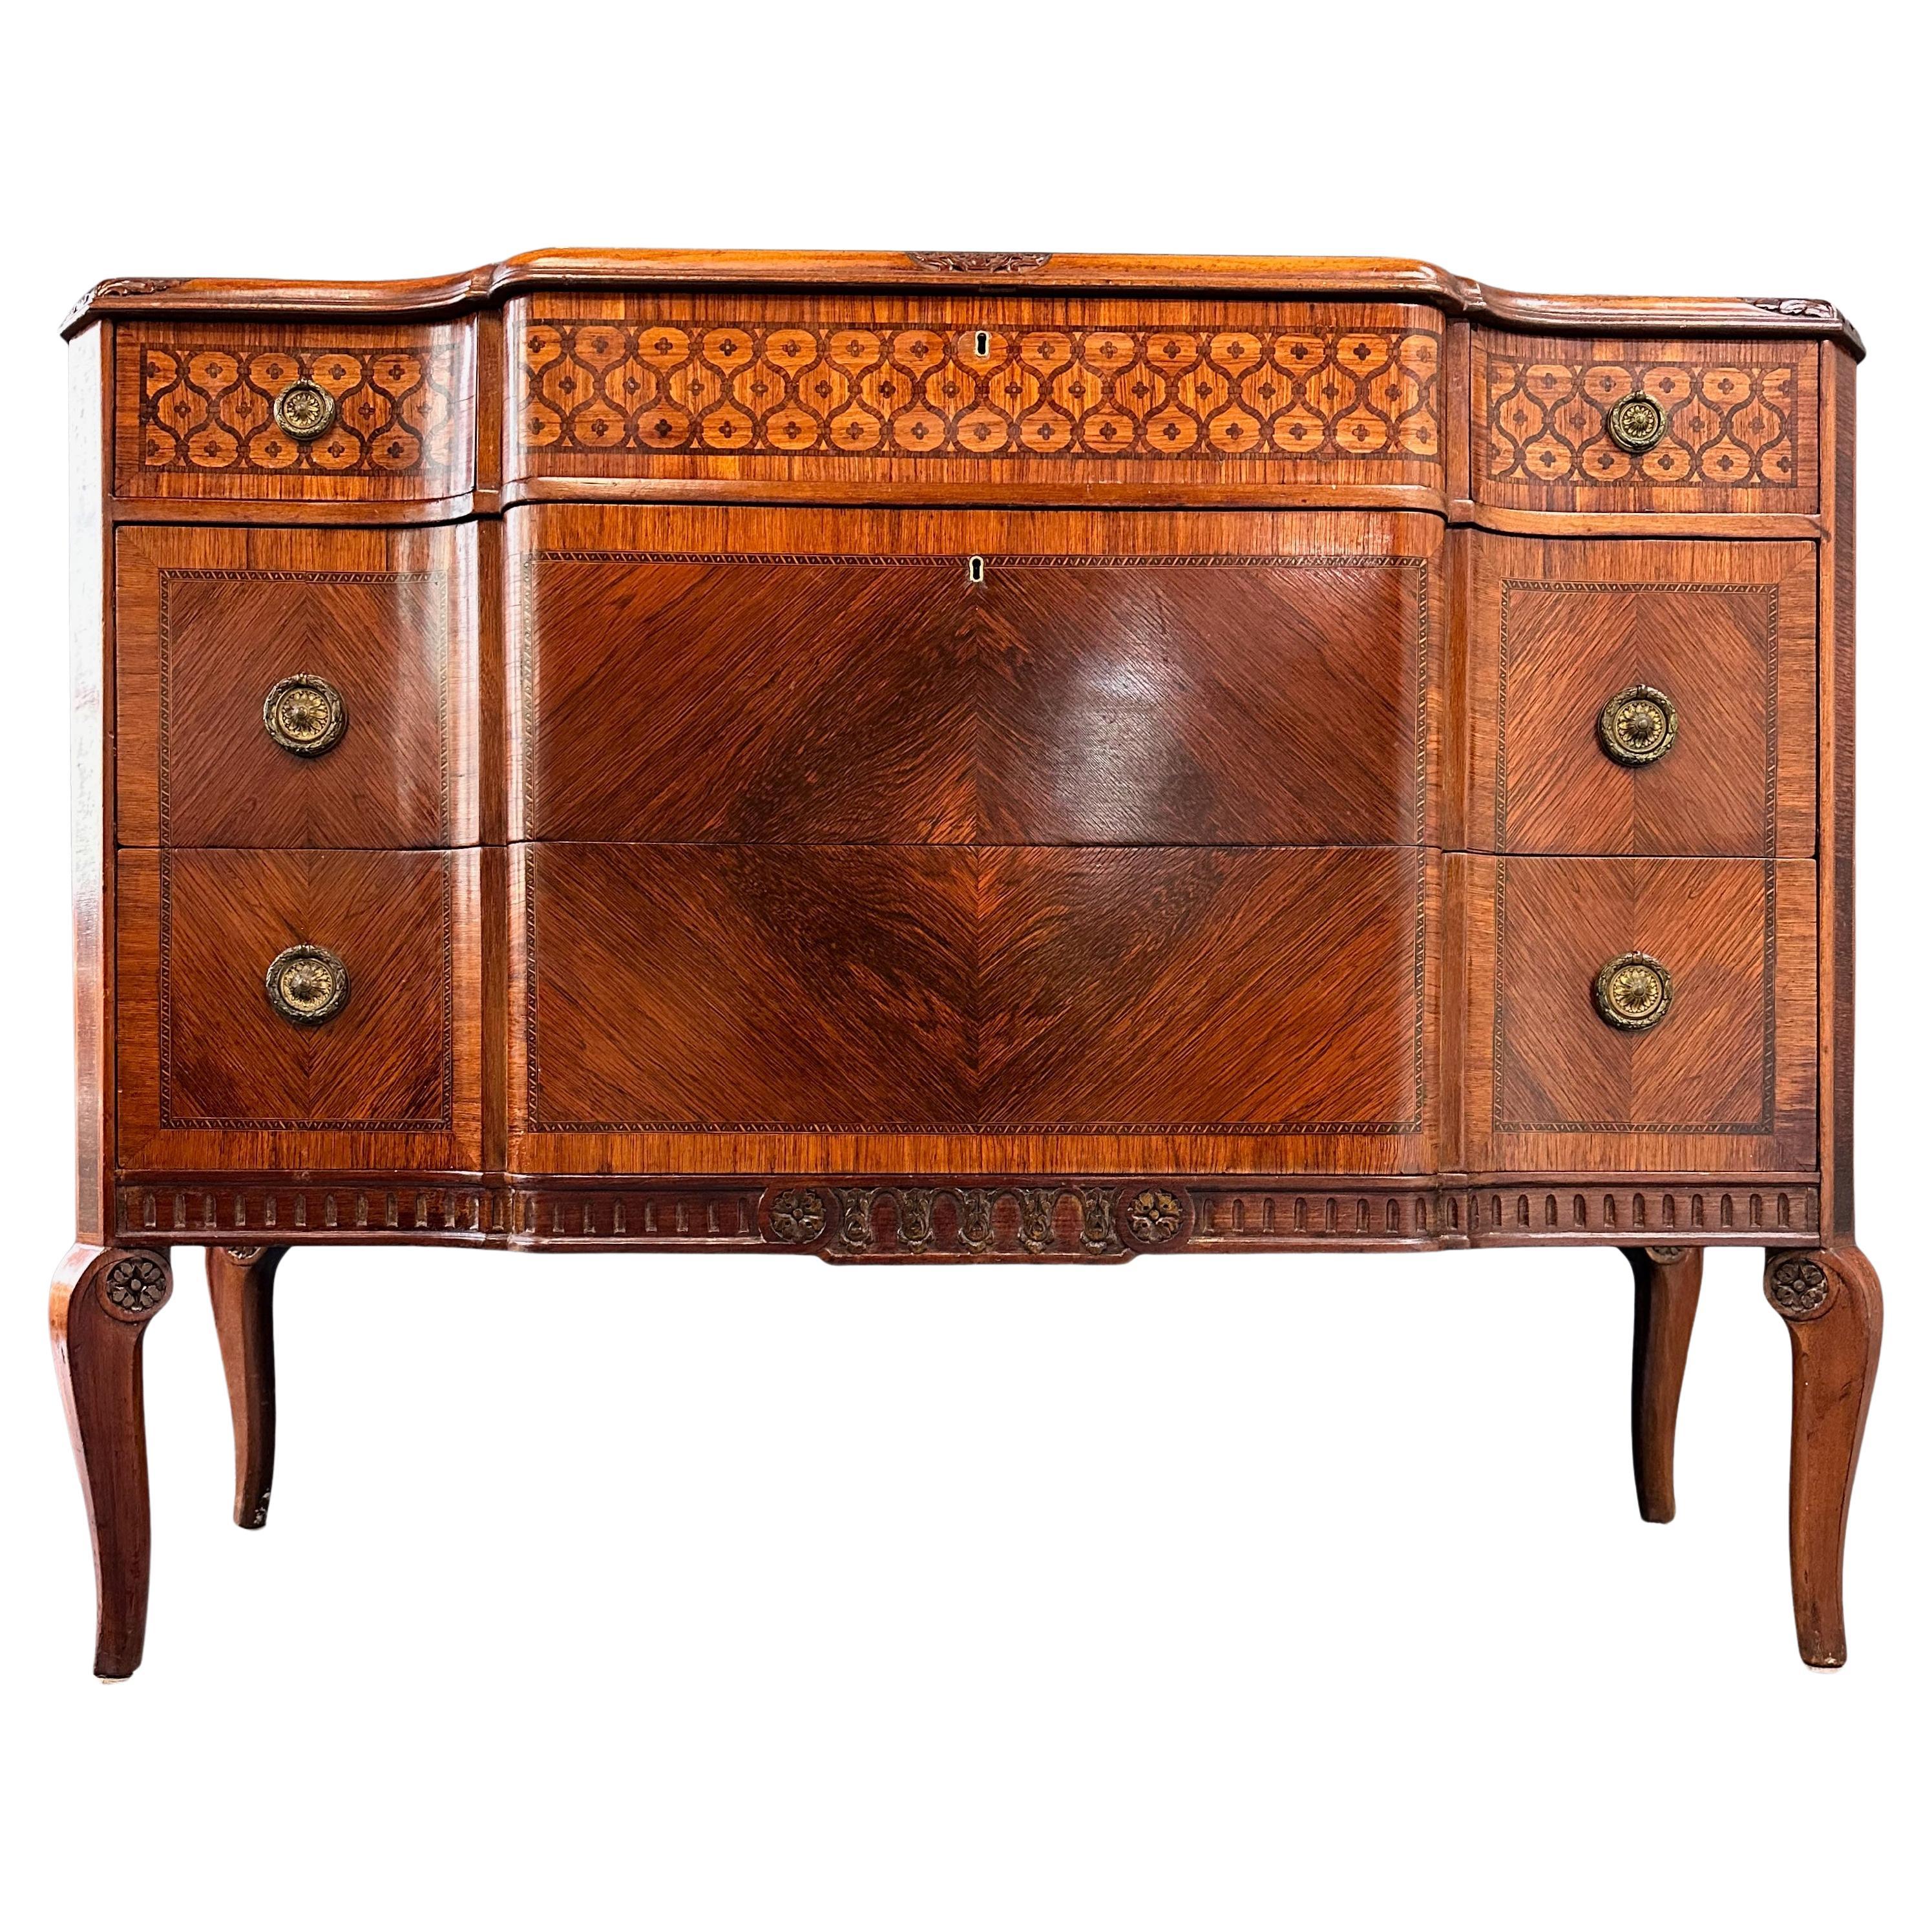 Italian Louis XVI Style Intricate Marquetry Commode Imported by Slack & Rassnick